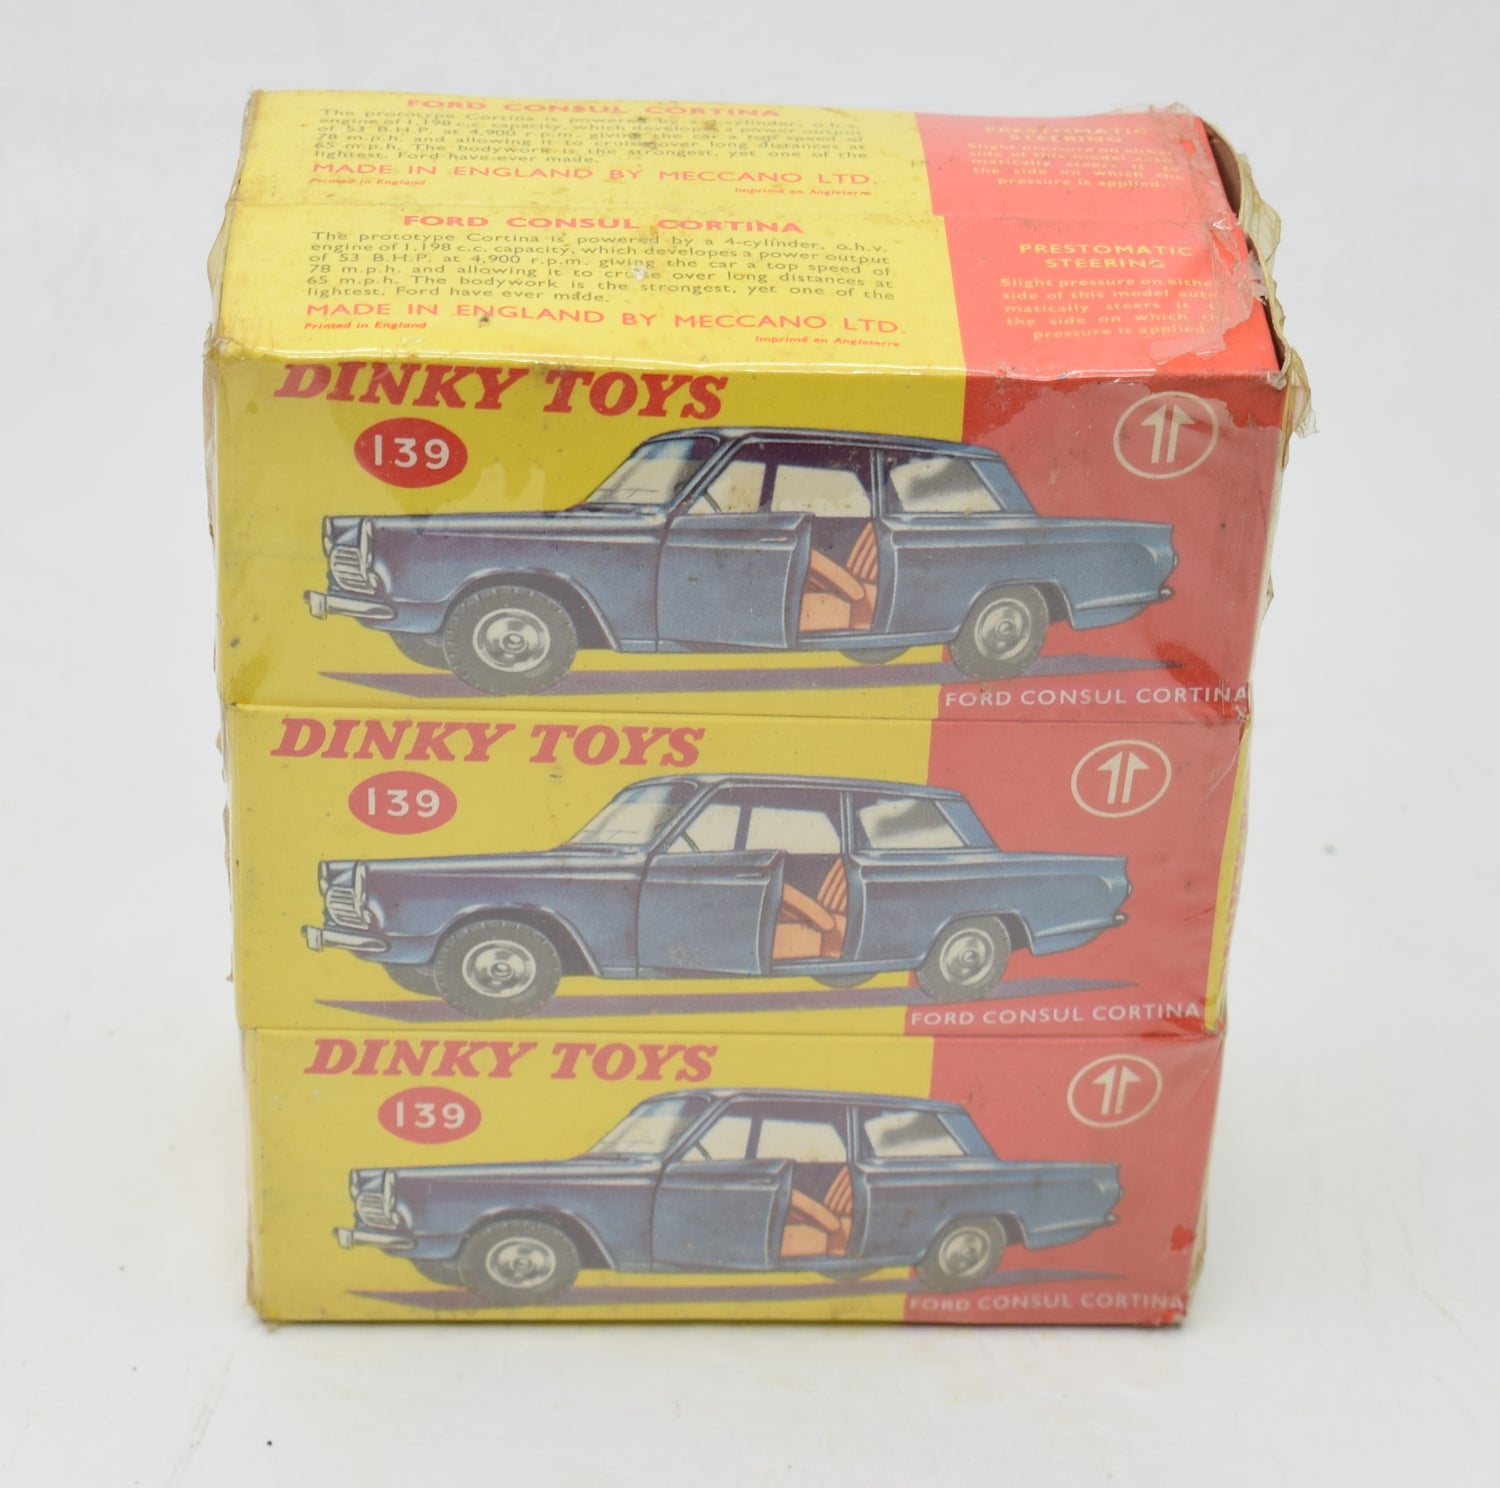 Dinky toys 139 Cortina Trade wrap of 6